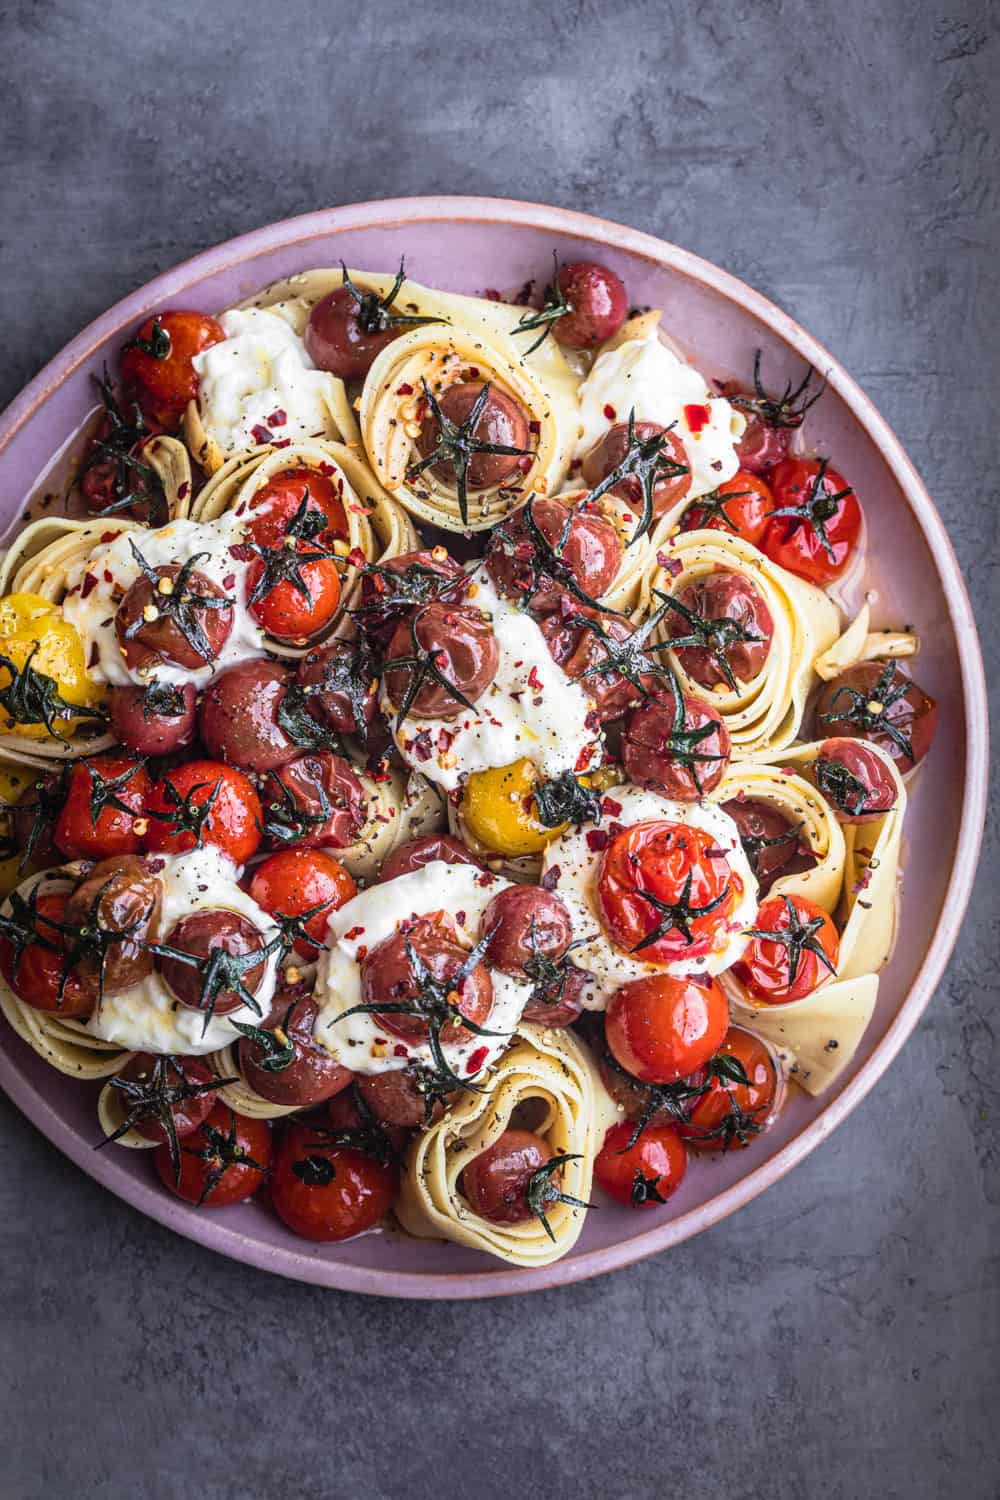 Different shades of red and yellow cherry tomato confit on top of pasta with burrata in a pink plate, overhead shot.